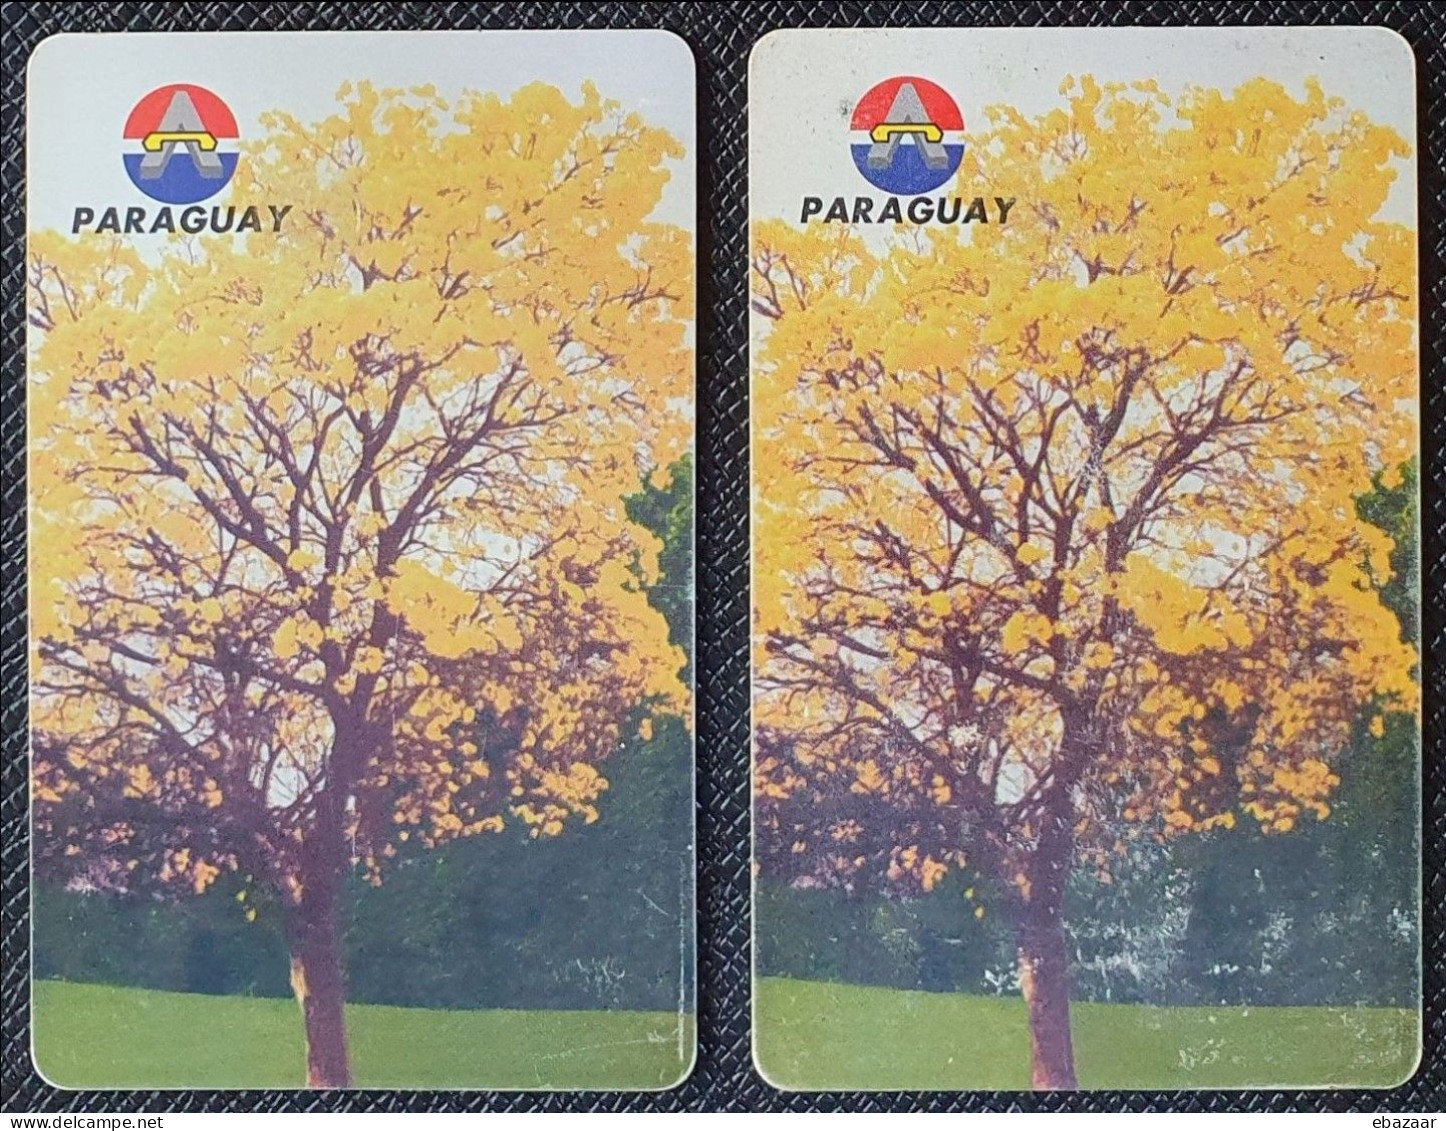 Paraguay 2 Chip Phonecards 10 & 30 Impulsos Used + FREE GIFT - Paraguay